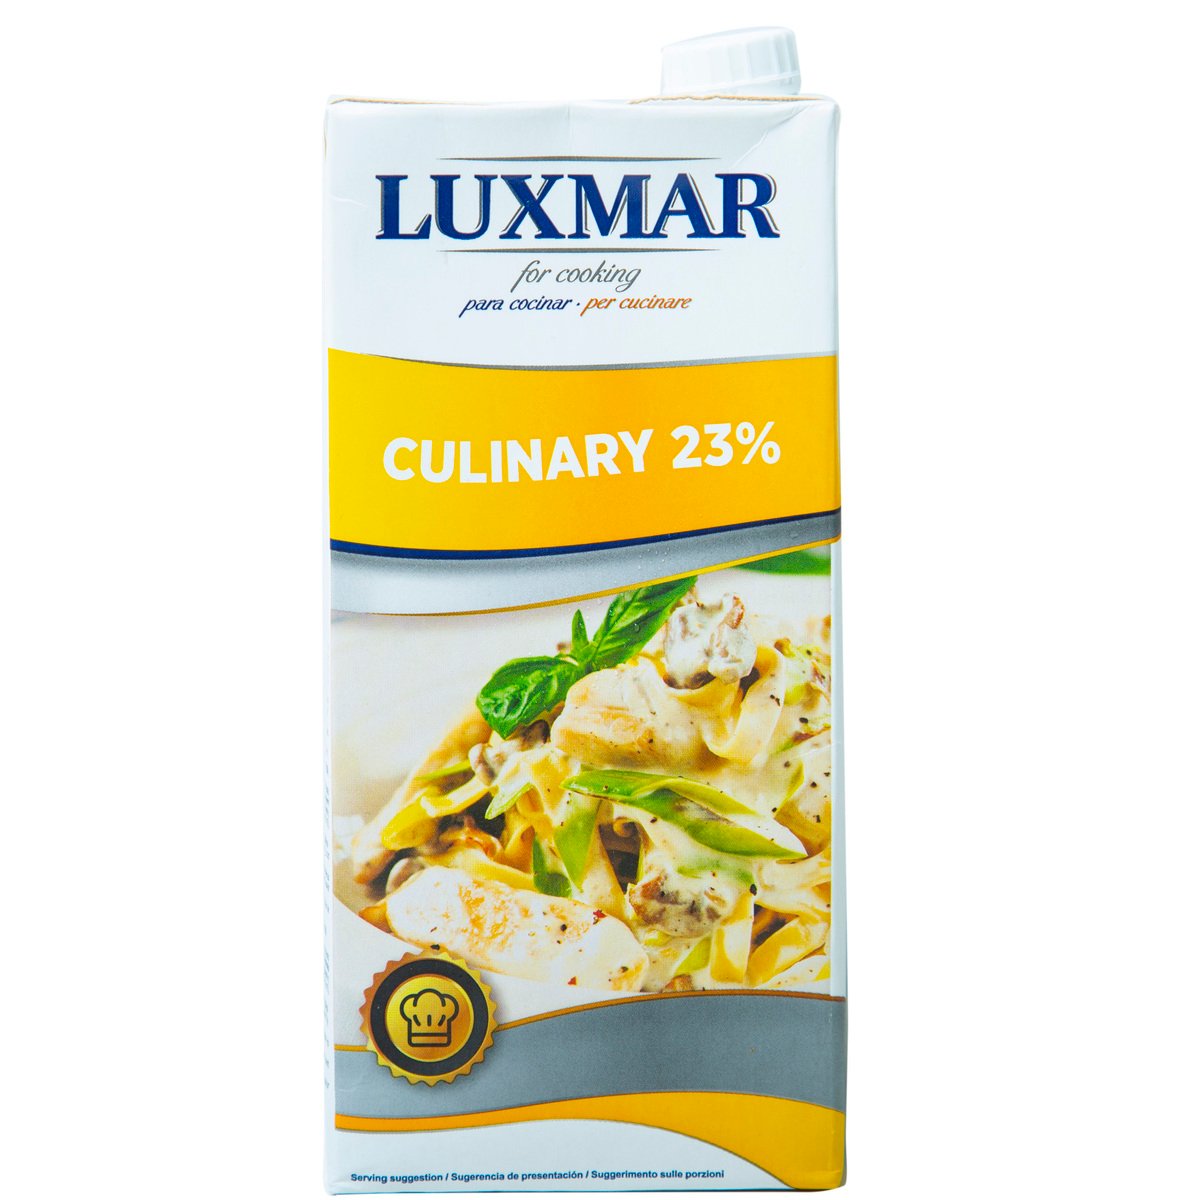 Luxmar Culinary Cooking Cream 1 Litre